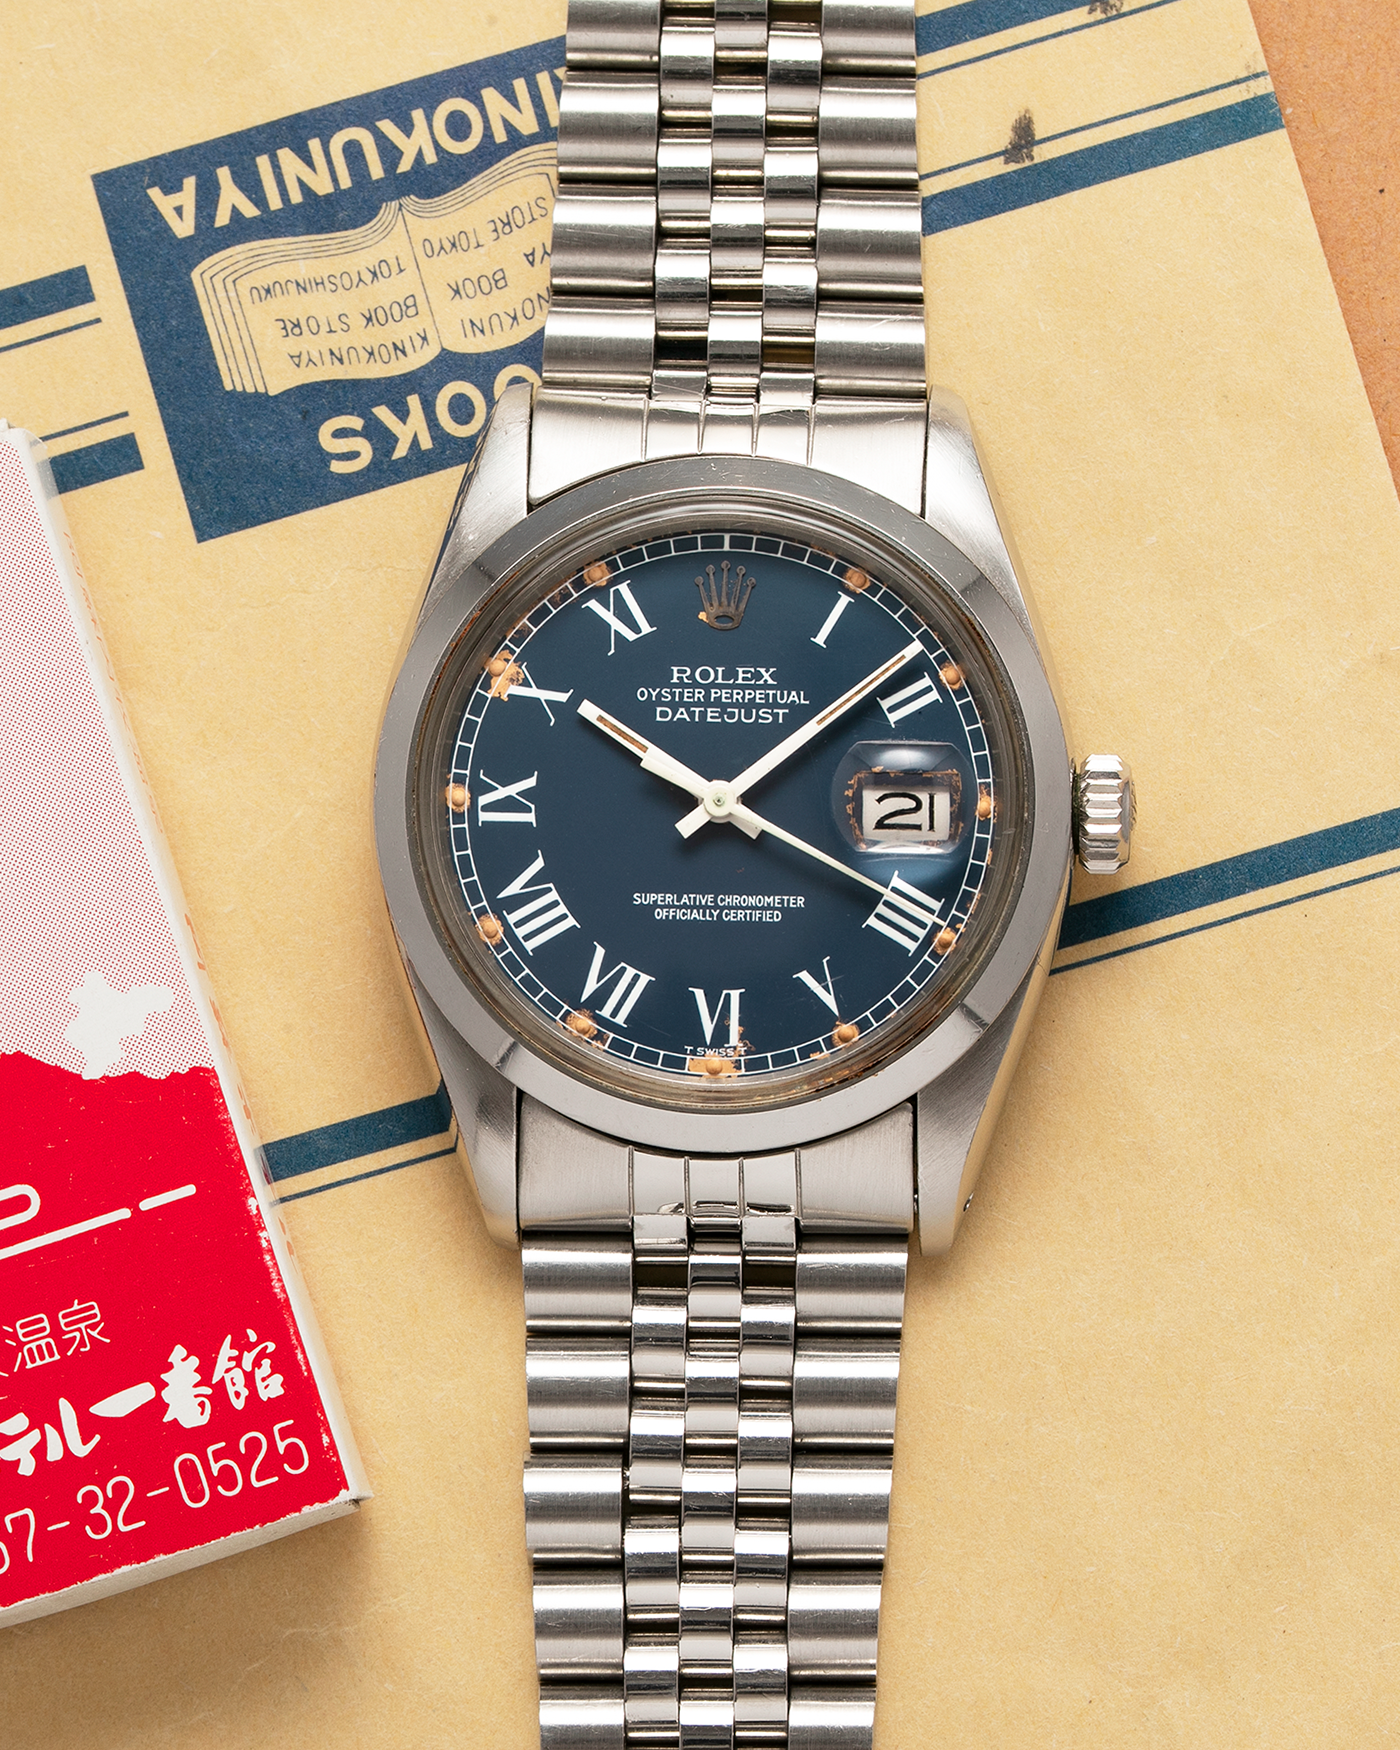 Brand: Rolex Year: 1980 Model: Datejust Reference Number: 16000 Serial Number: 60XXXXX Material: Stainless Steel Movement: Cal. 3035, Self-Winding Case Diameter: 36mm Lug Width: 20mm Bracelet/Strap: Rolex Stainless Steel 62510 Bracelet with 555 End Links